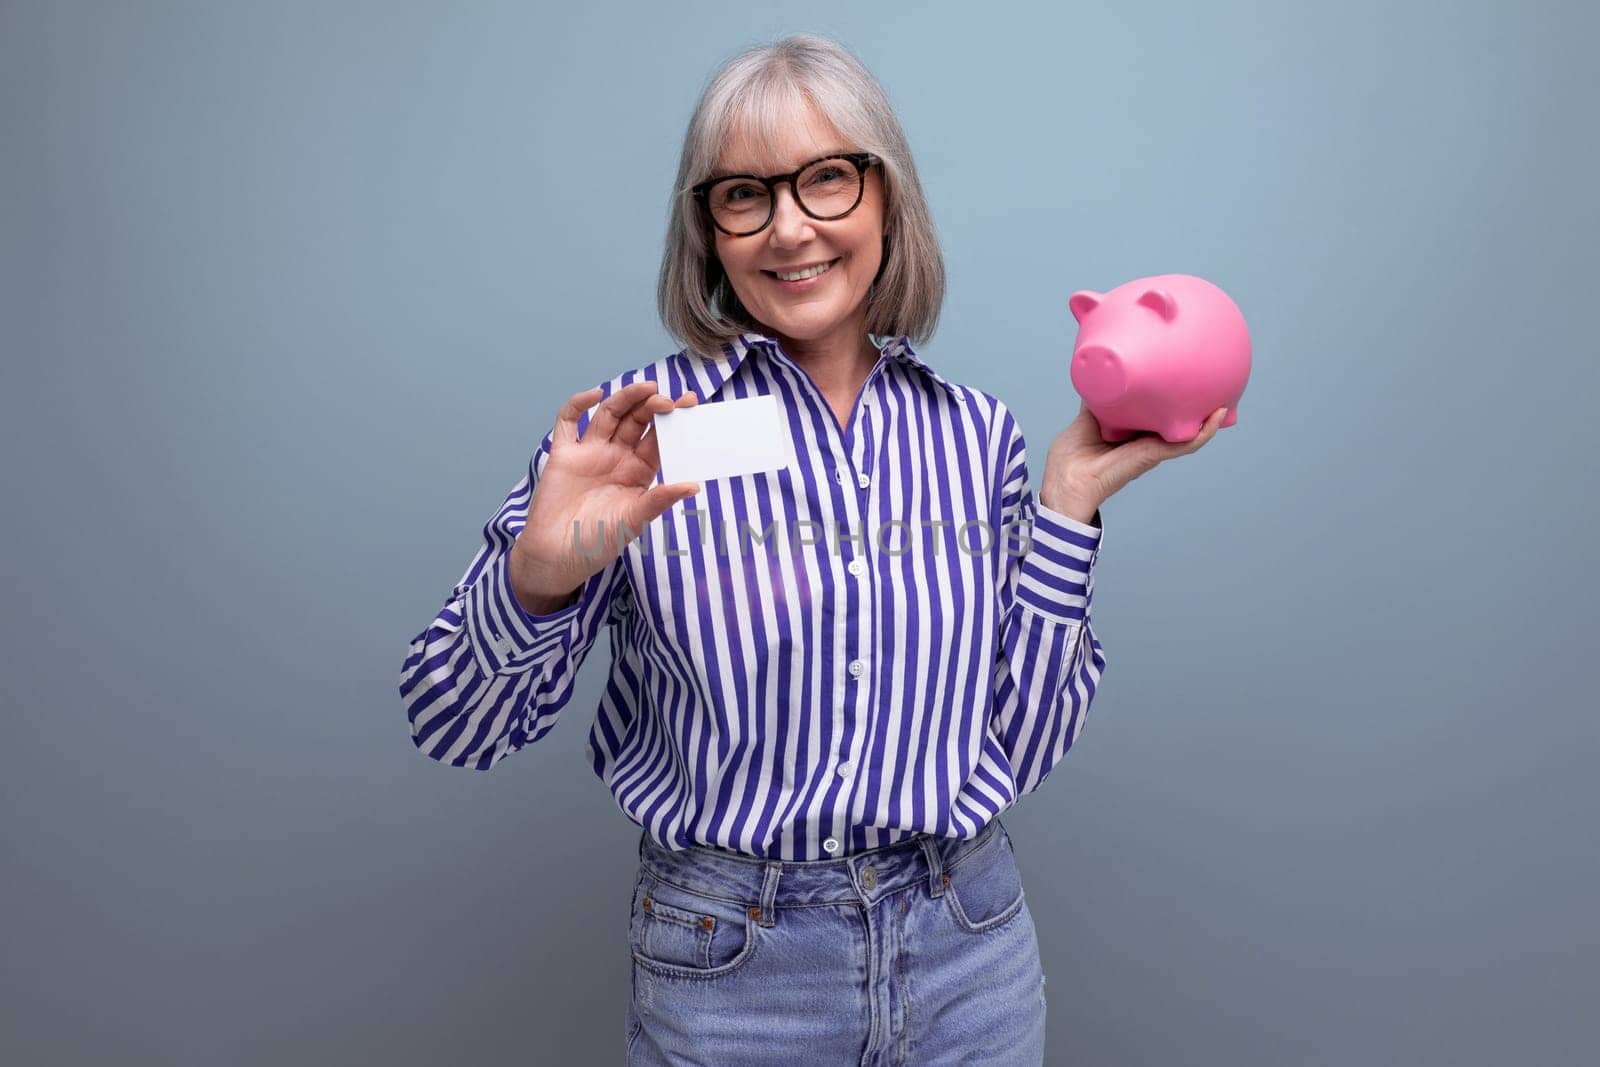 middle-aged woman with gray hair holding a piggy bank and a credit card with a mocap on a bright studio background.